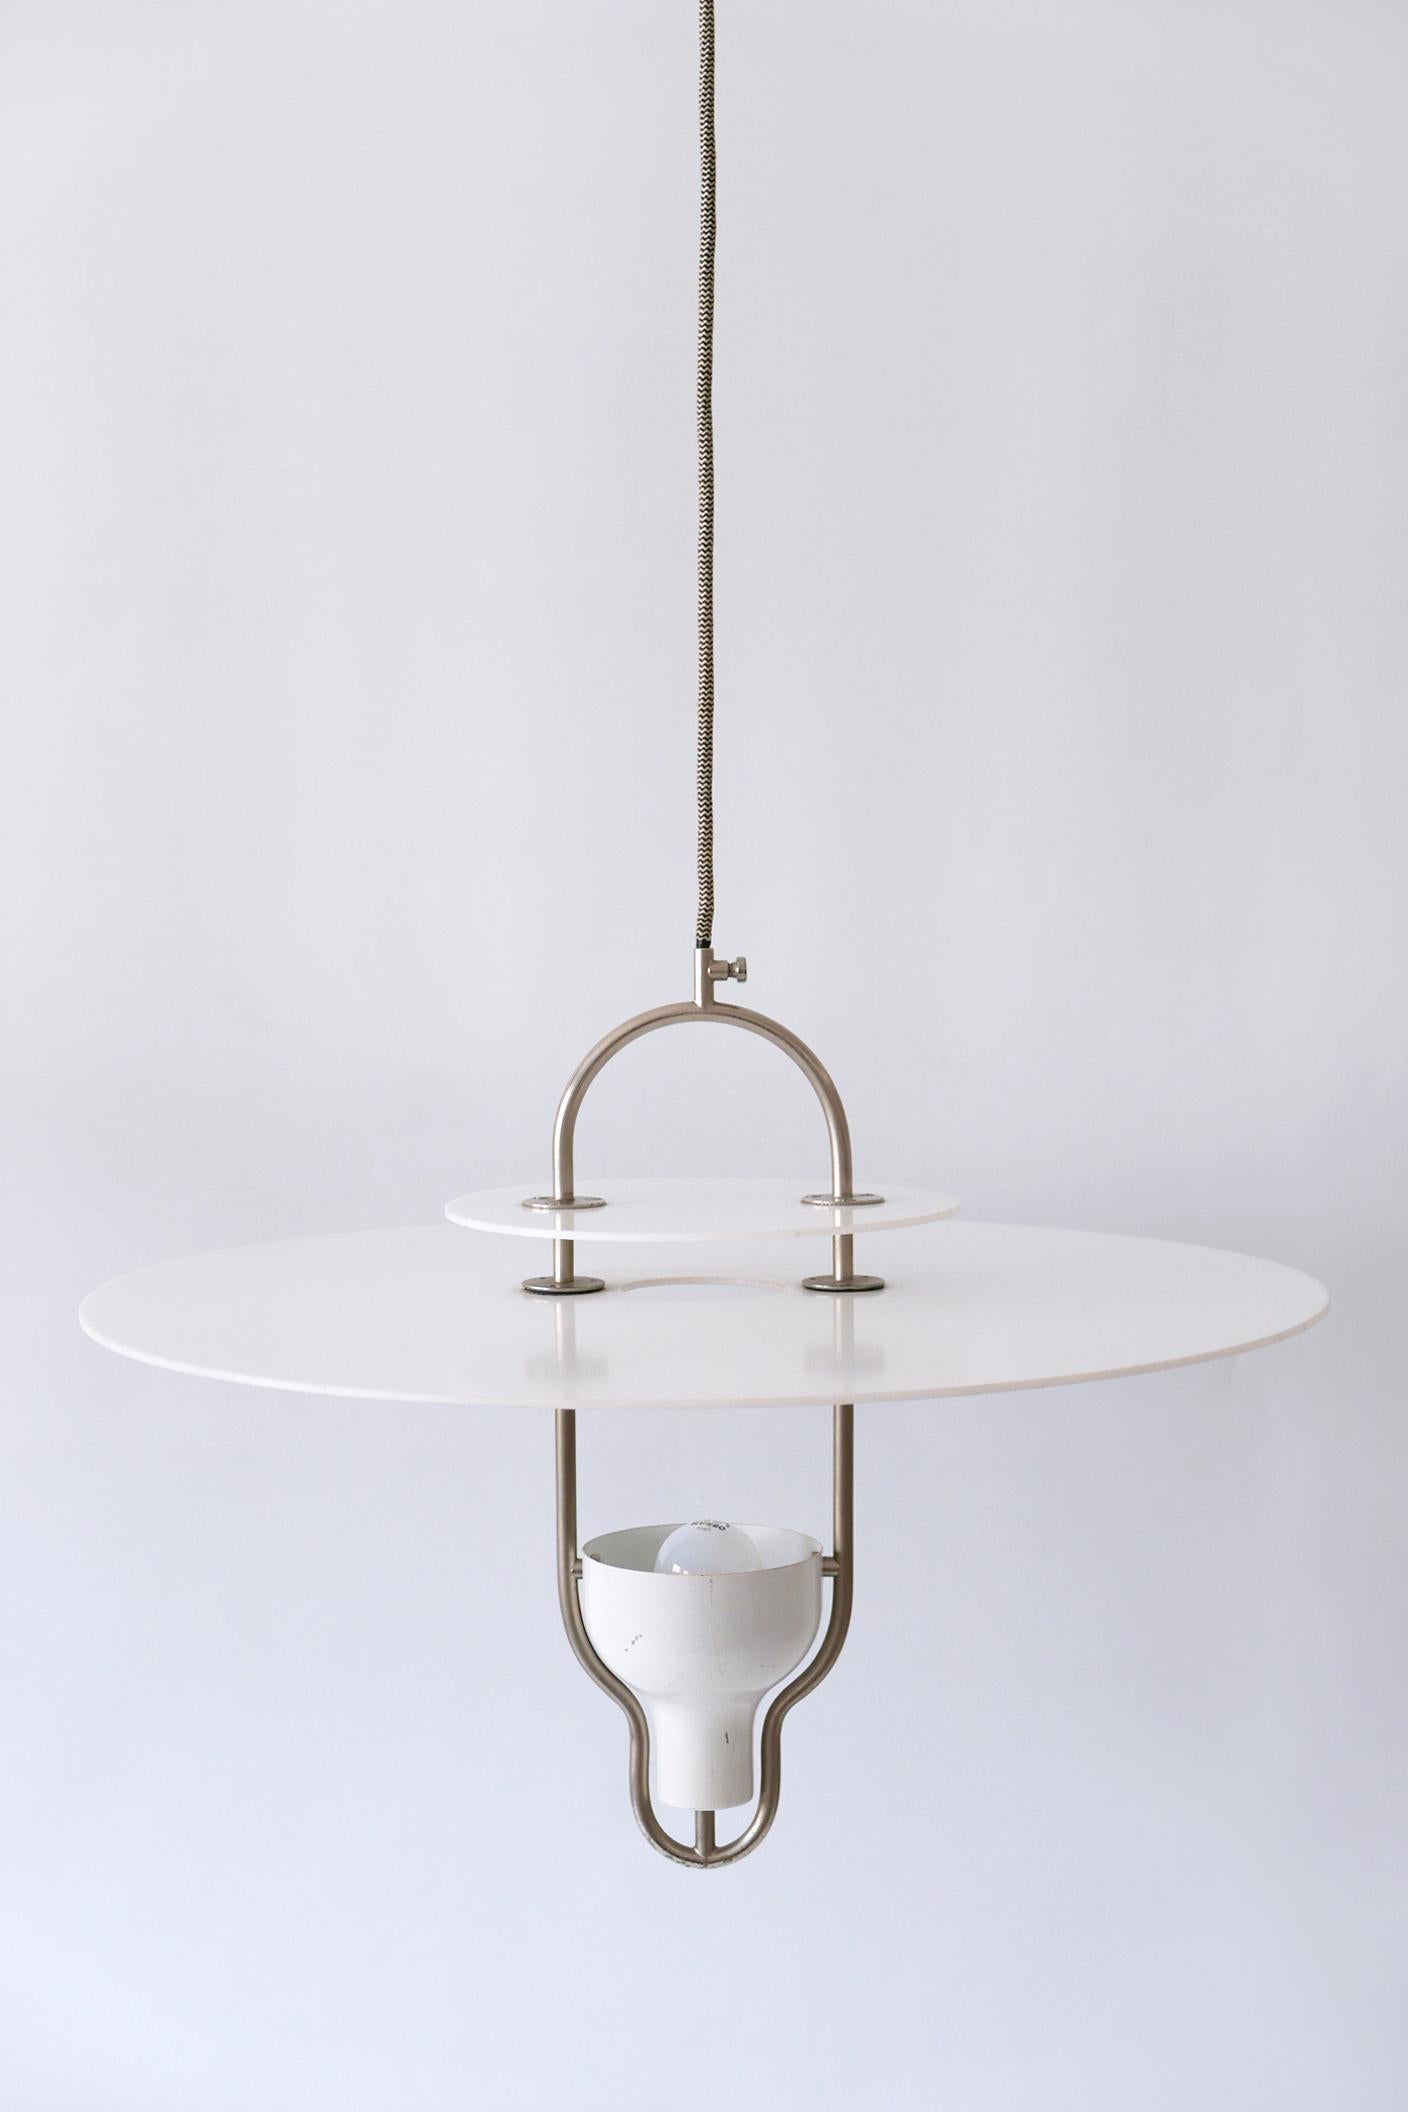 Italian Exceptional Mid-Century Modern Ufo Pendant Lamp, Italy, 1960s For Sale